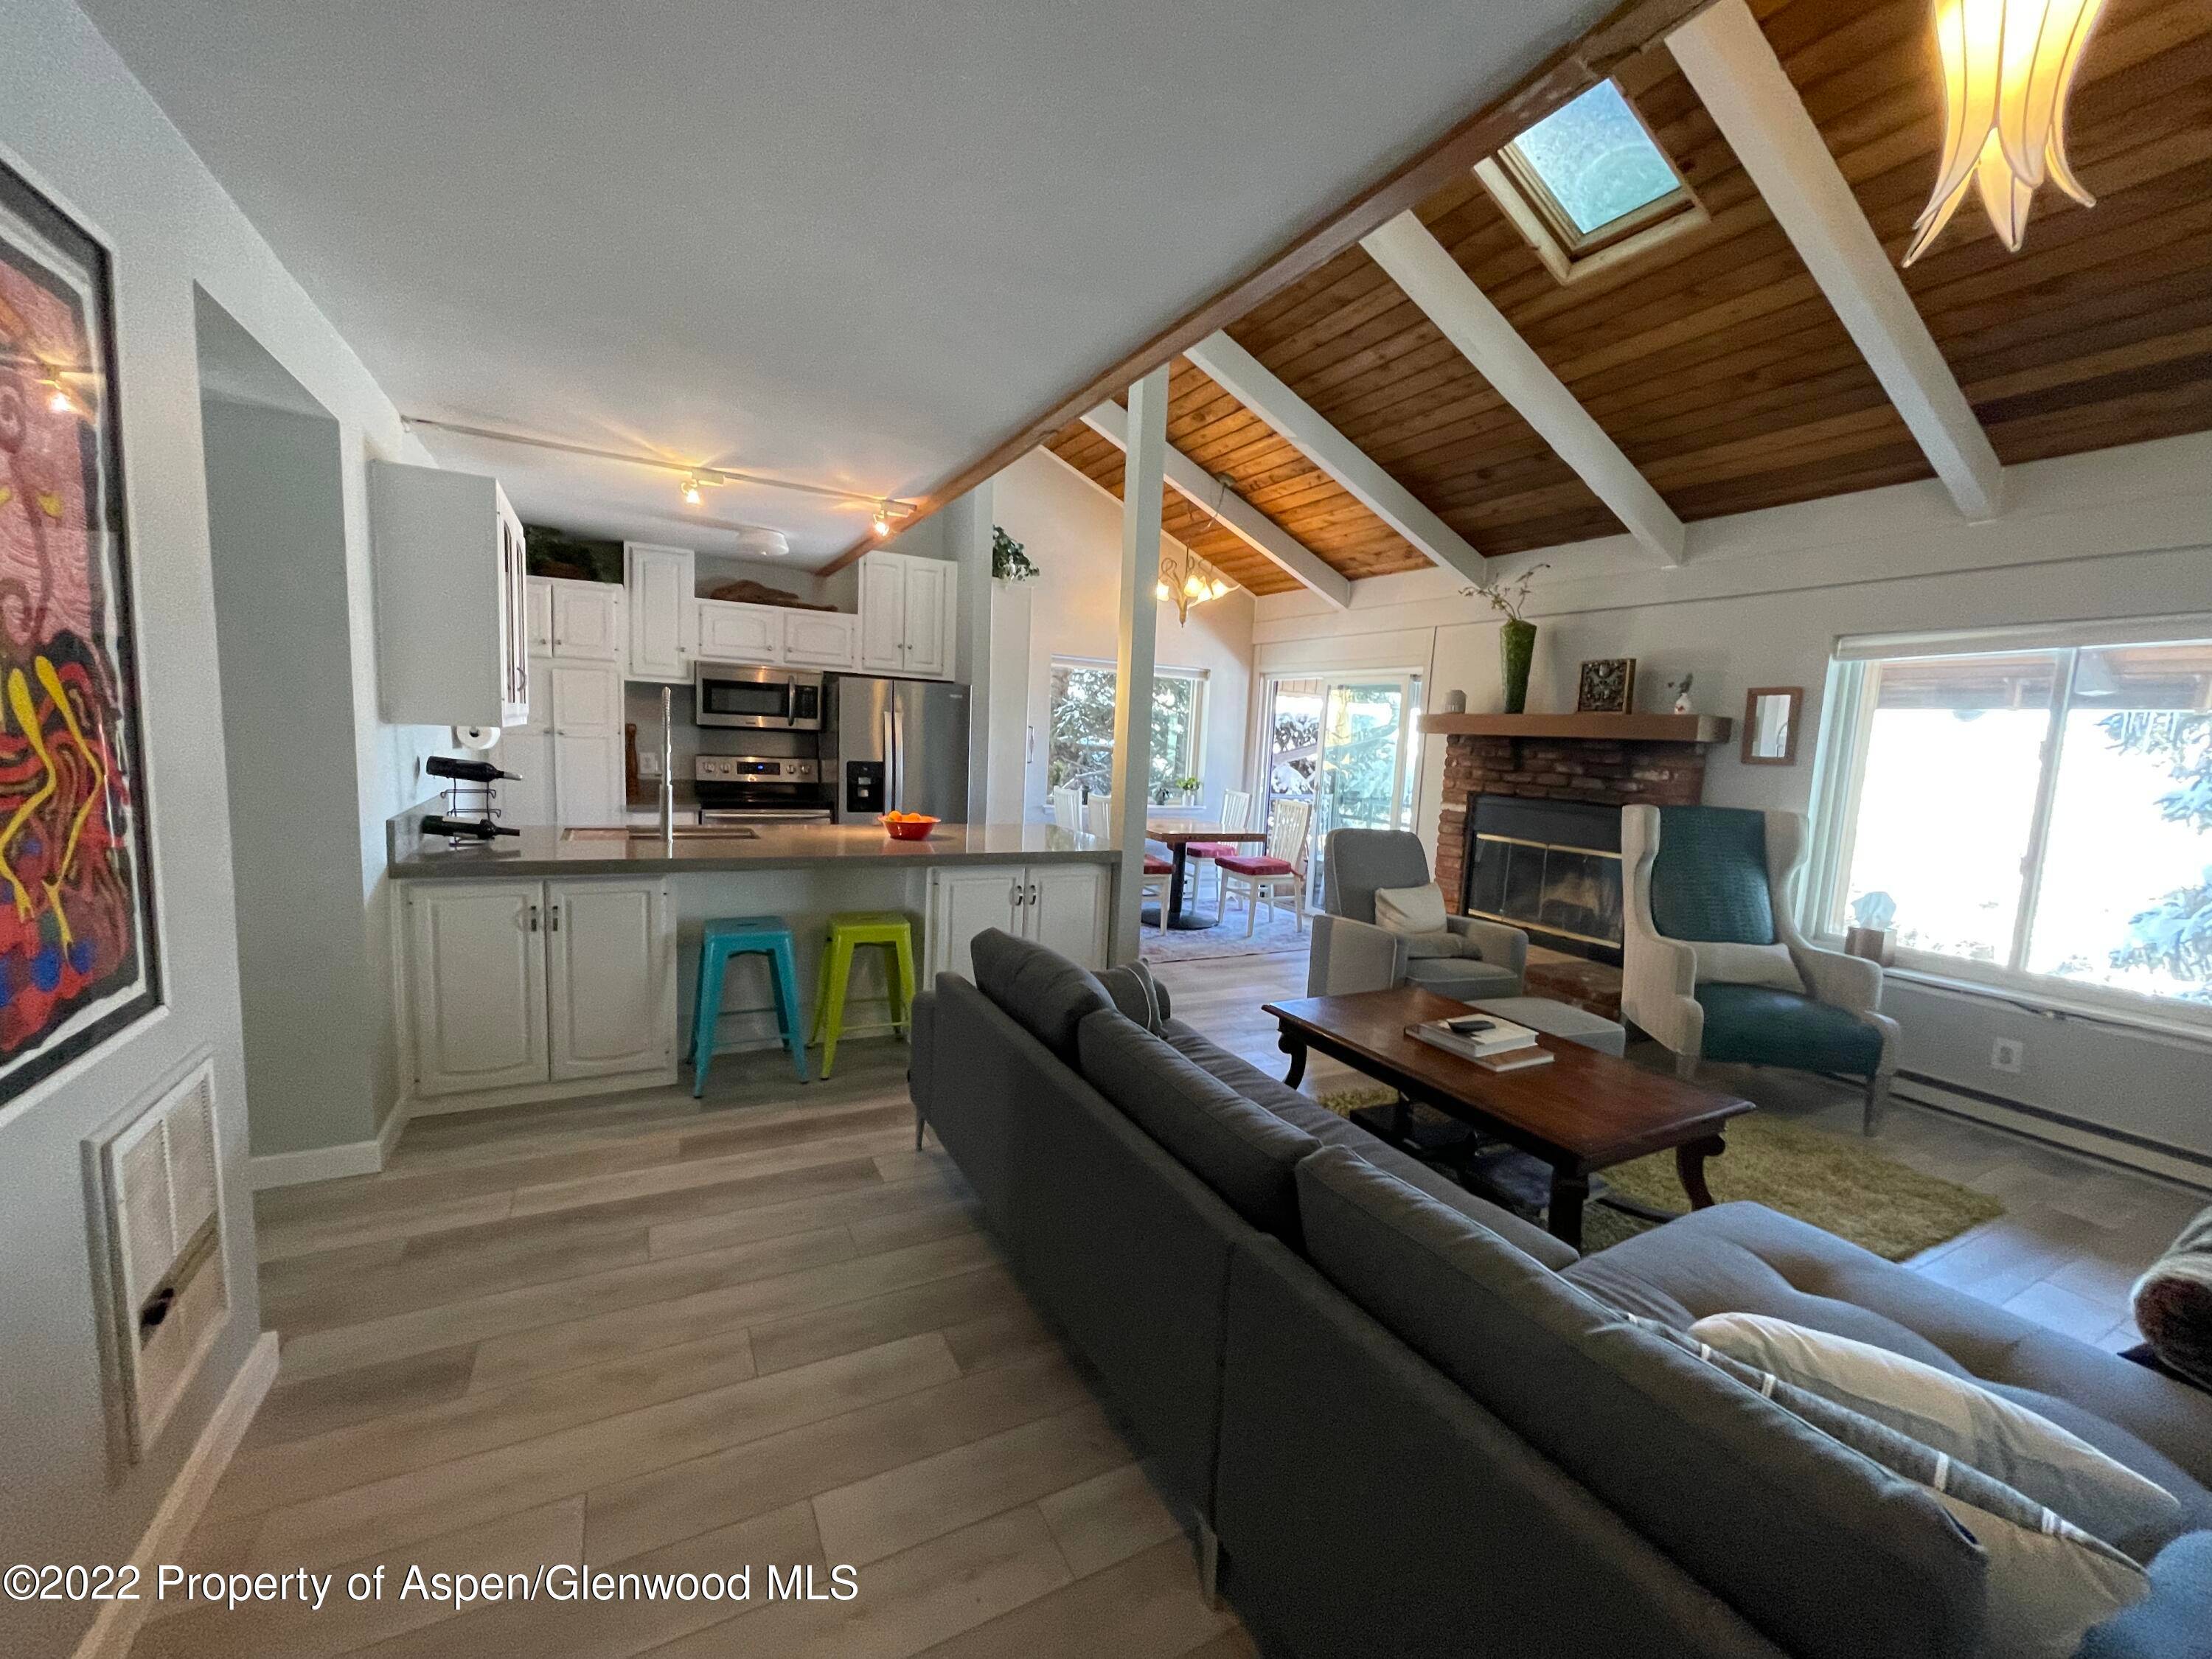 Settle in to this remodeled 3 bedroom, 3 bathroom Seasons Four unit.